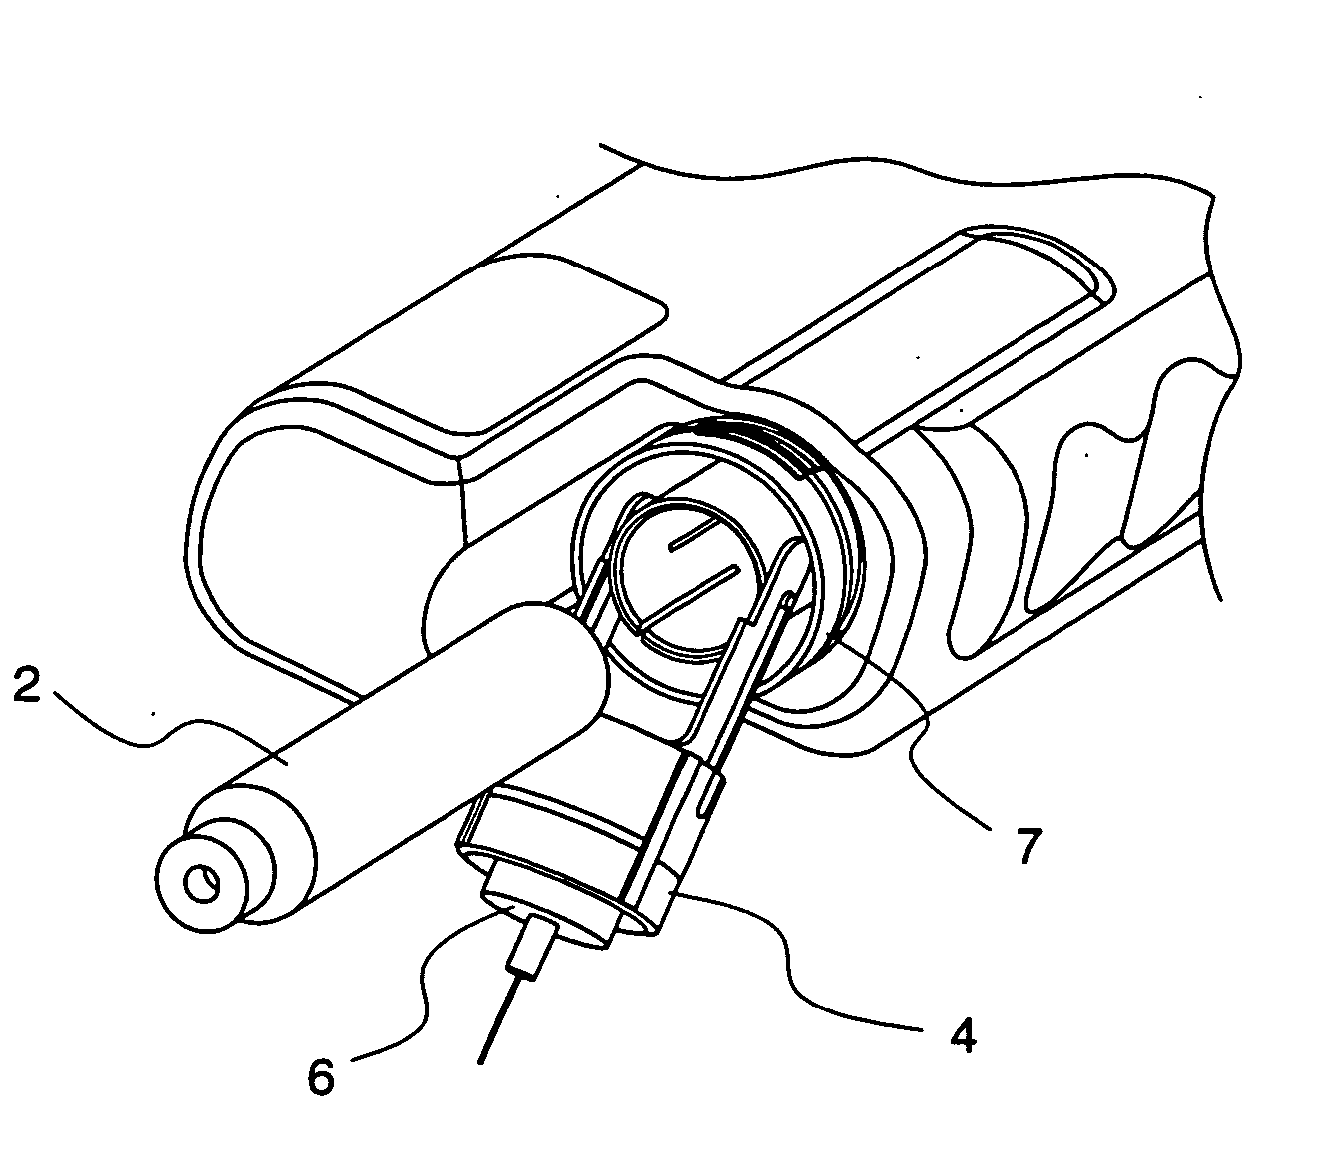 Administration apparatus for medical use